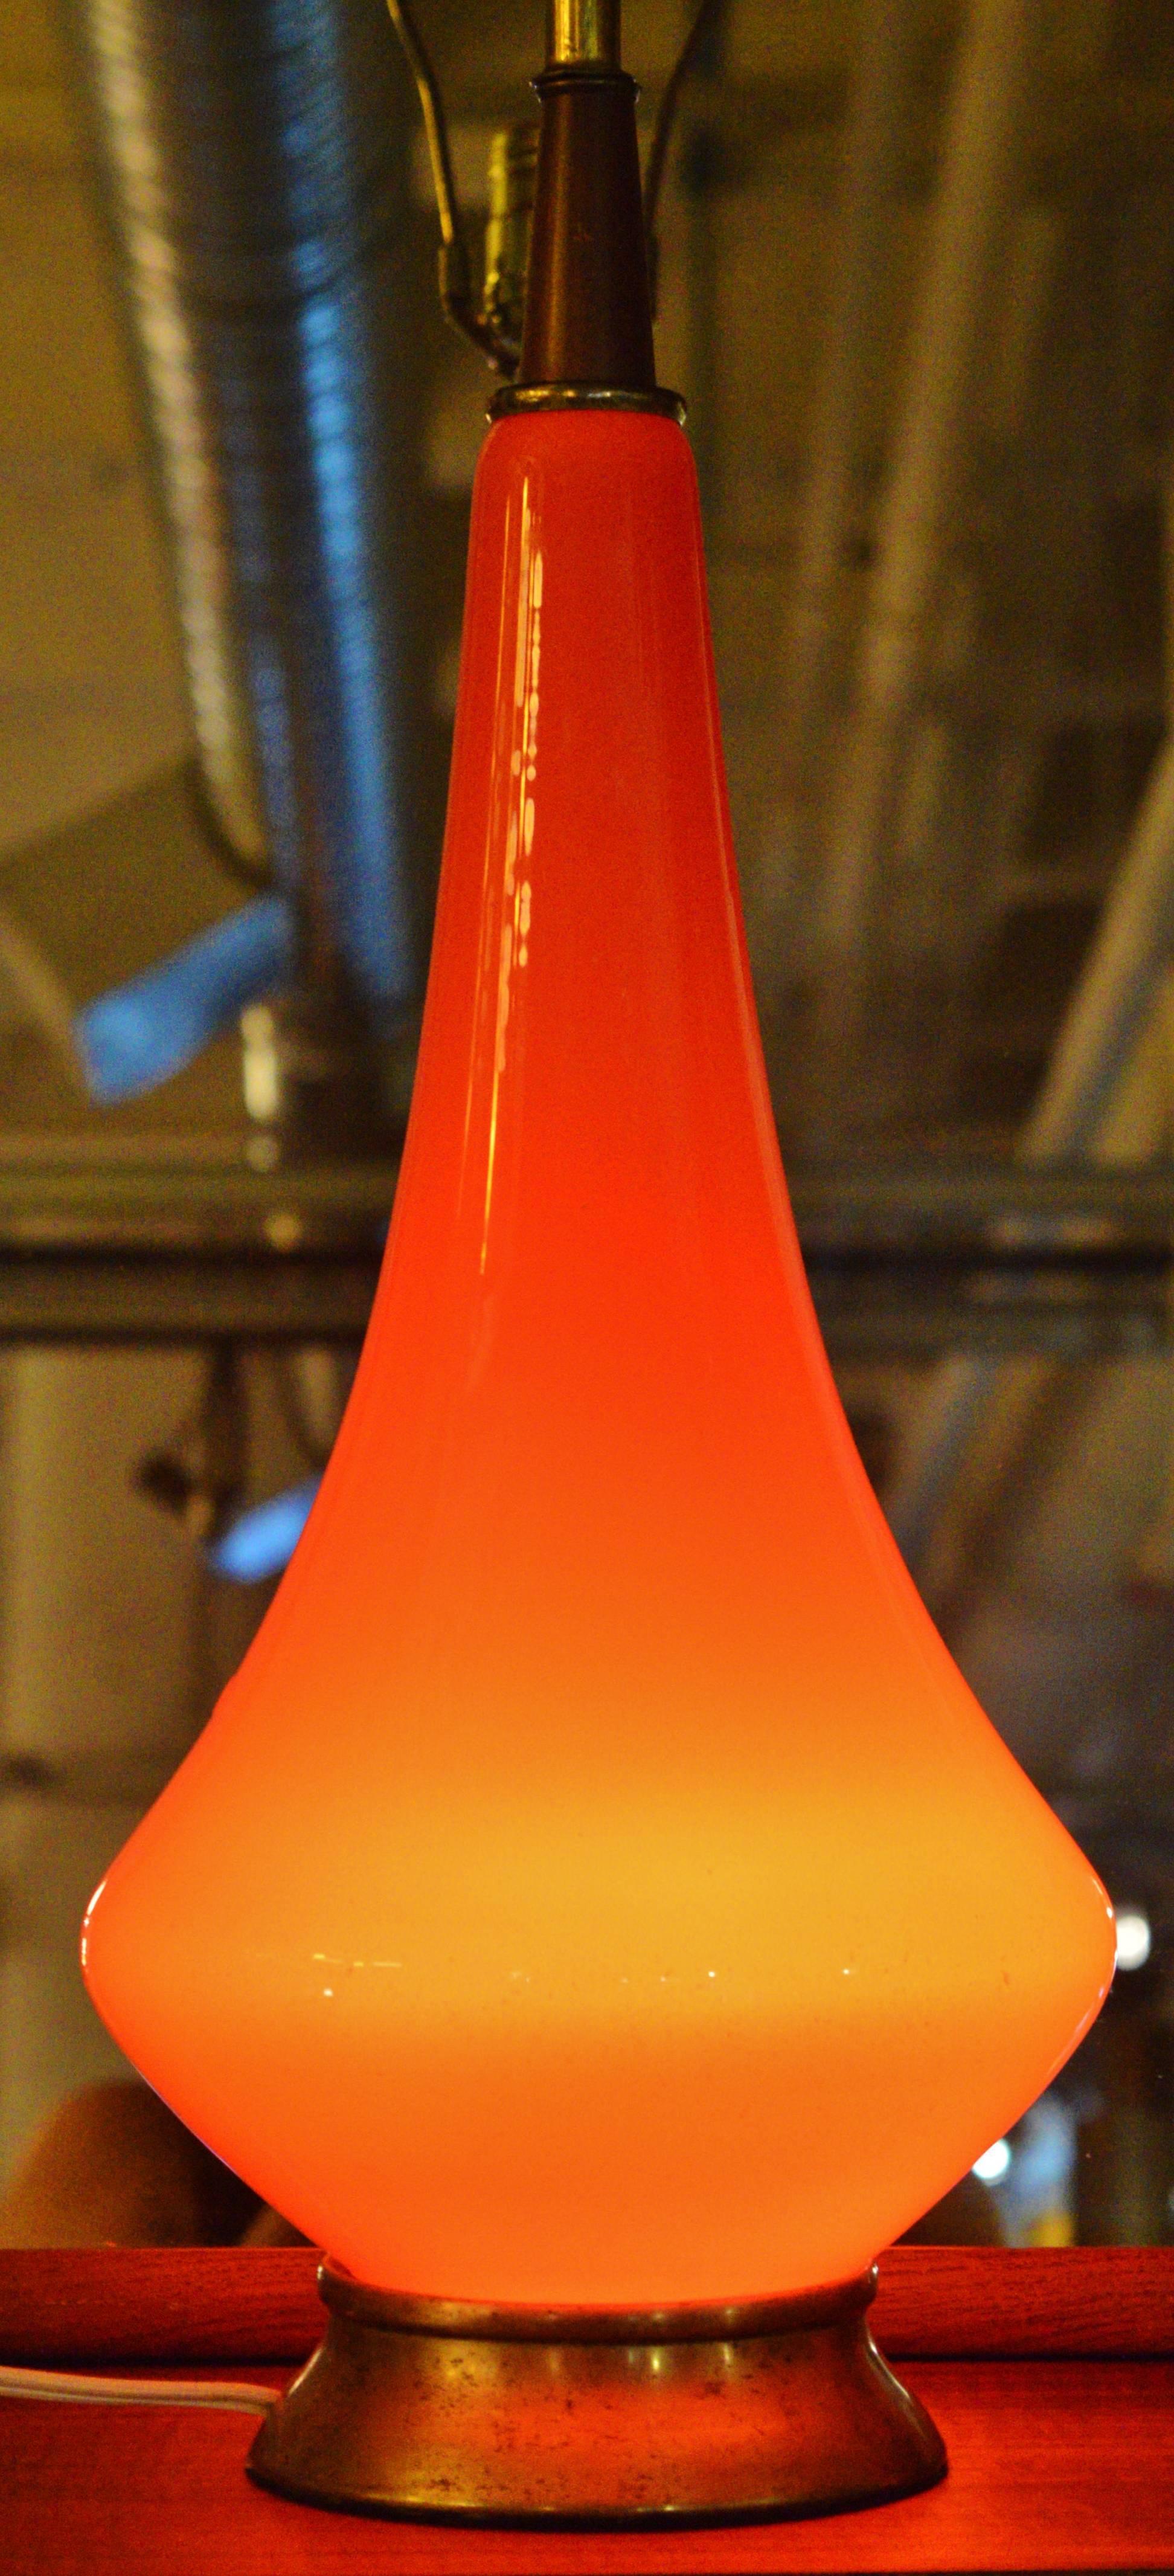 This Italian orange glass lamp has the most striking color and form. Featuring an awesome light in the base (see second photo) as well as above--the last two photos attempt to show the distinction of the base light on and off though they do it no